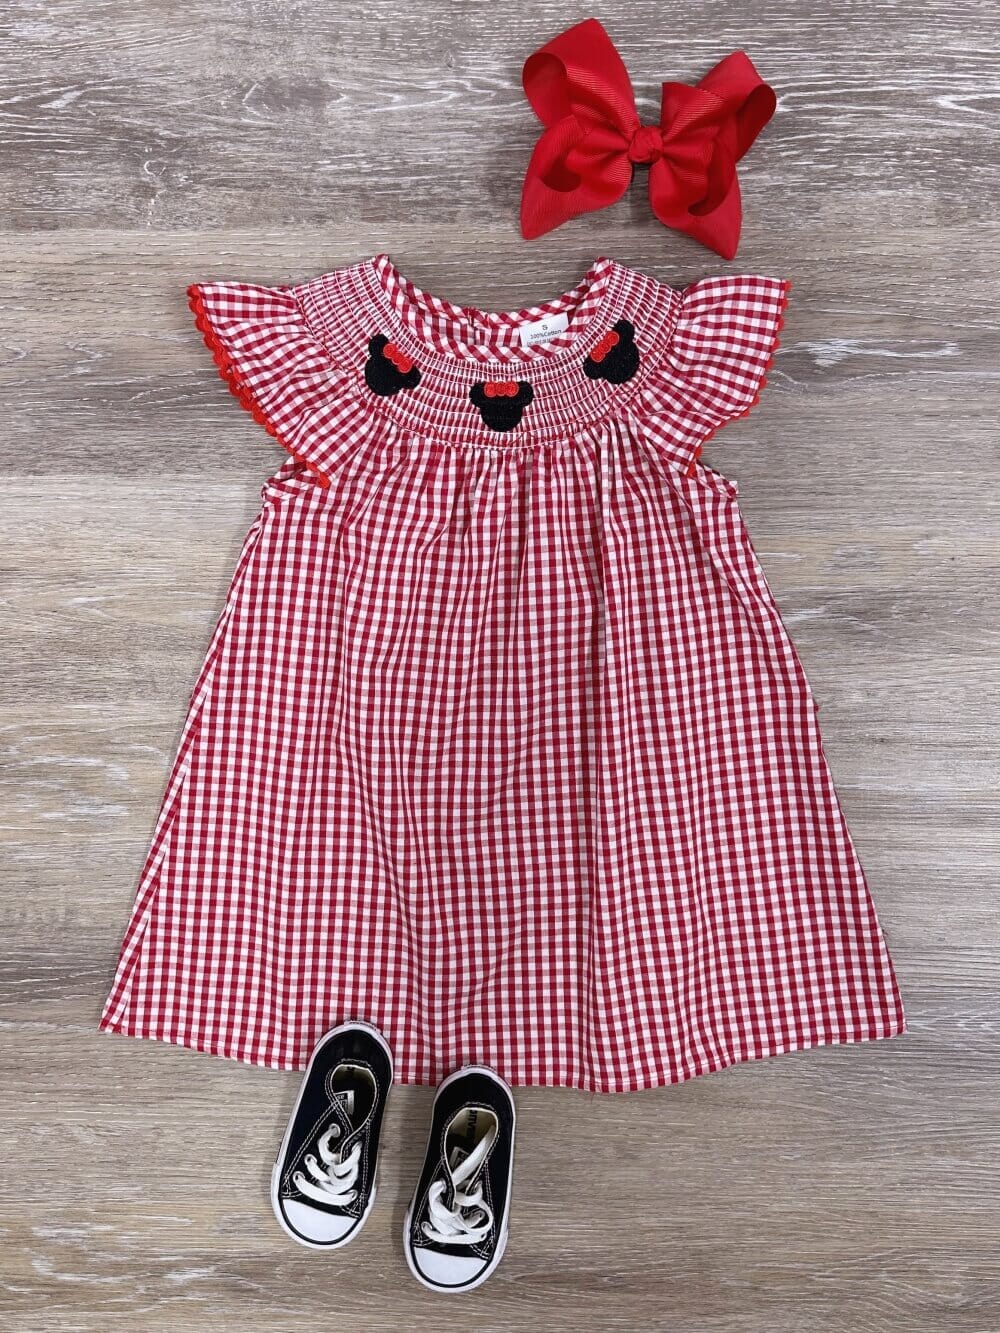 Red Gingham Plaid Embroidered Bow Mouse Dress - Sydney So Sweet